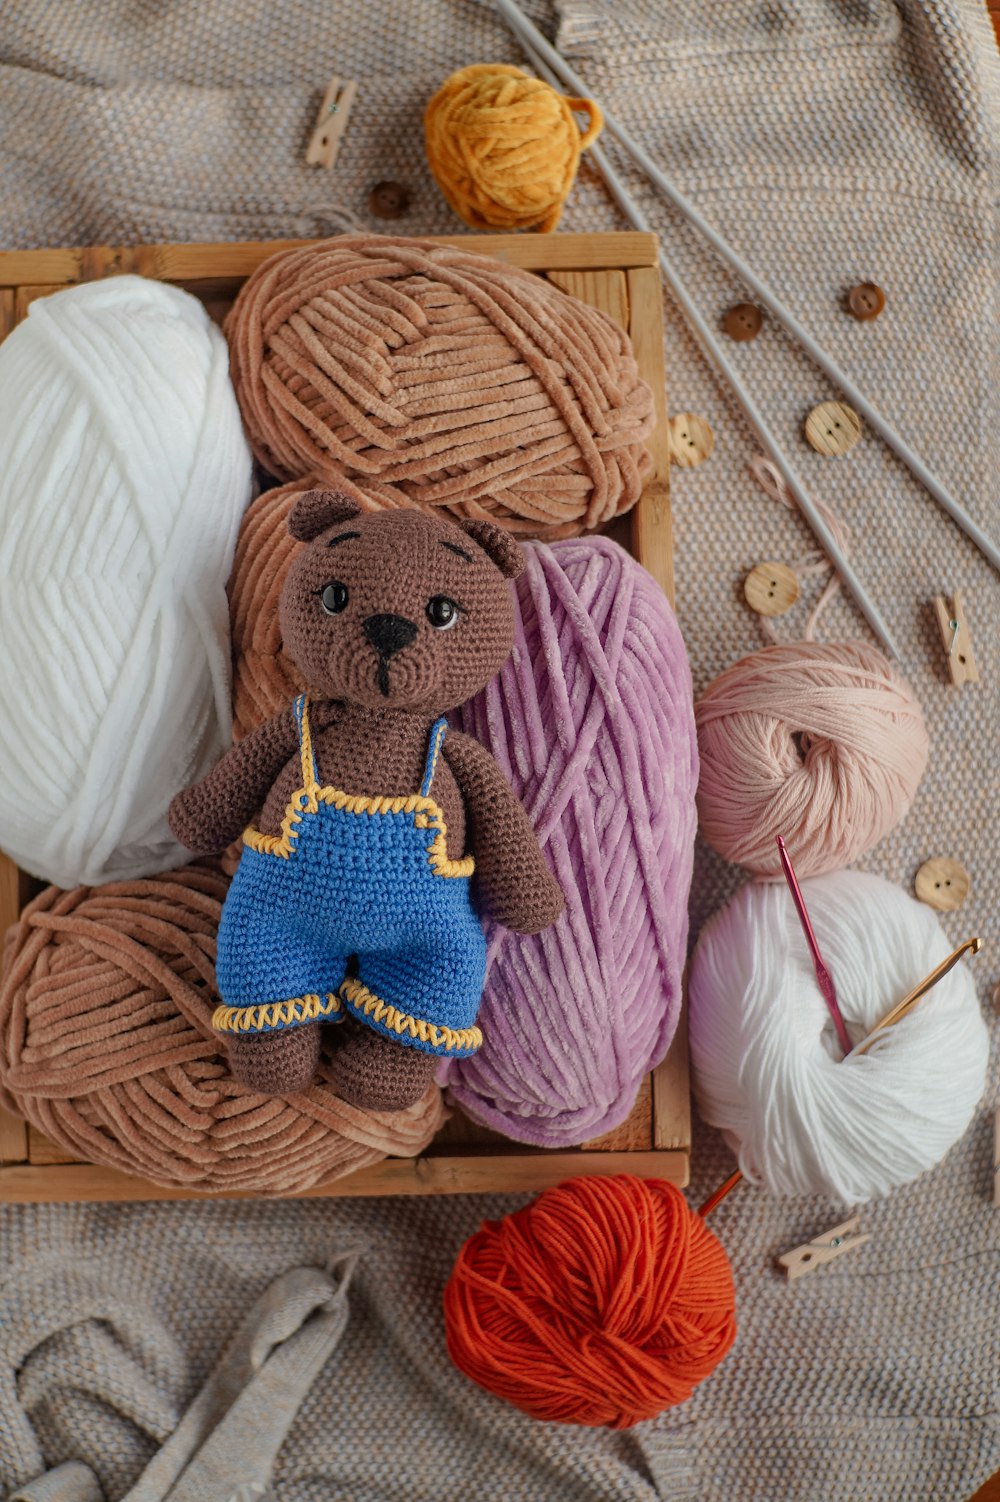 a teddy bear sitting on top of a wooden box next to balls of yarn